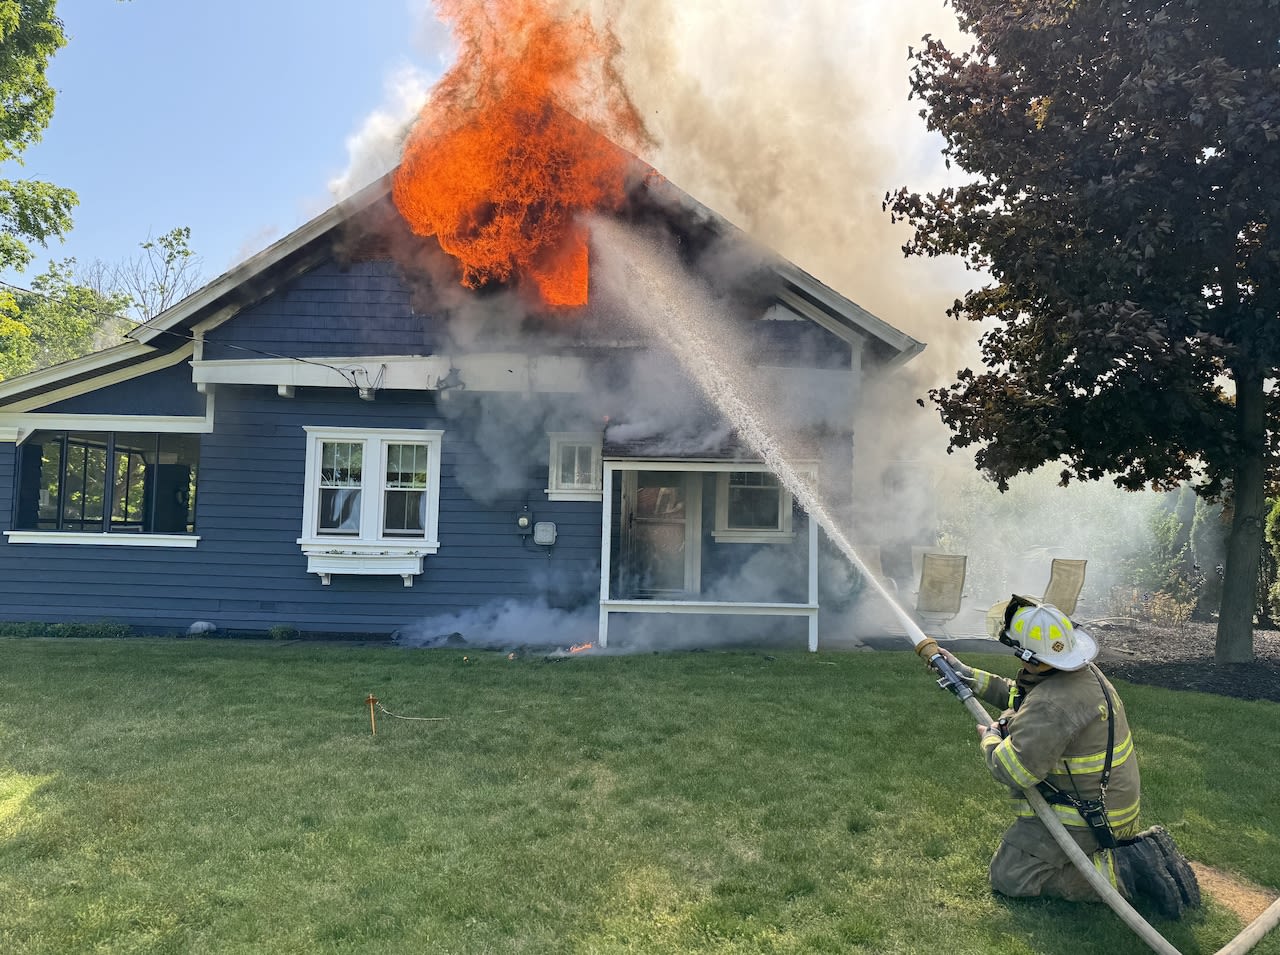 South Haven police rescue family dog as flames roar from second floor